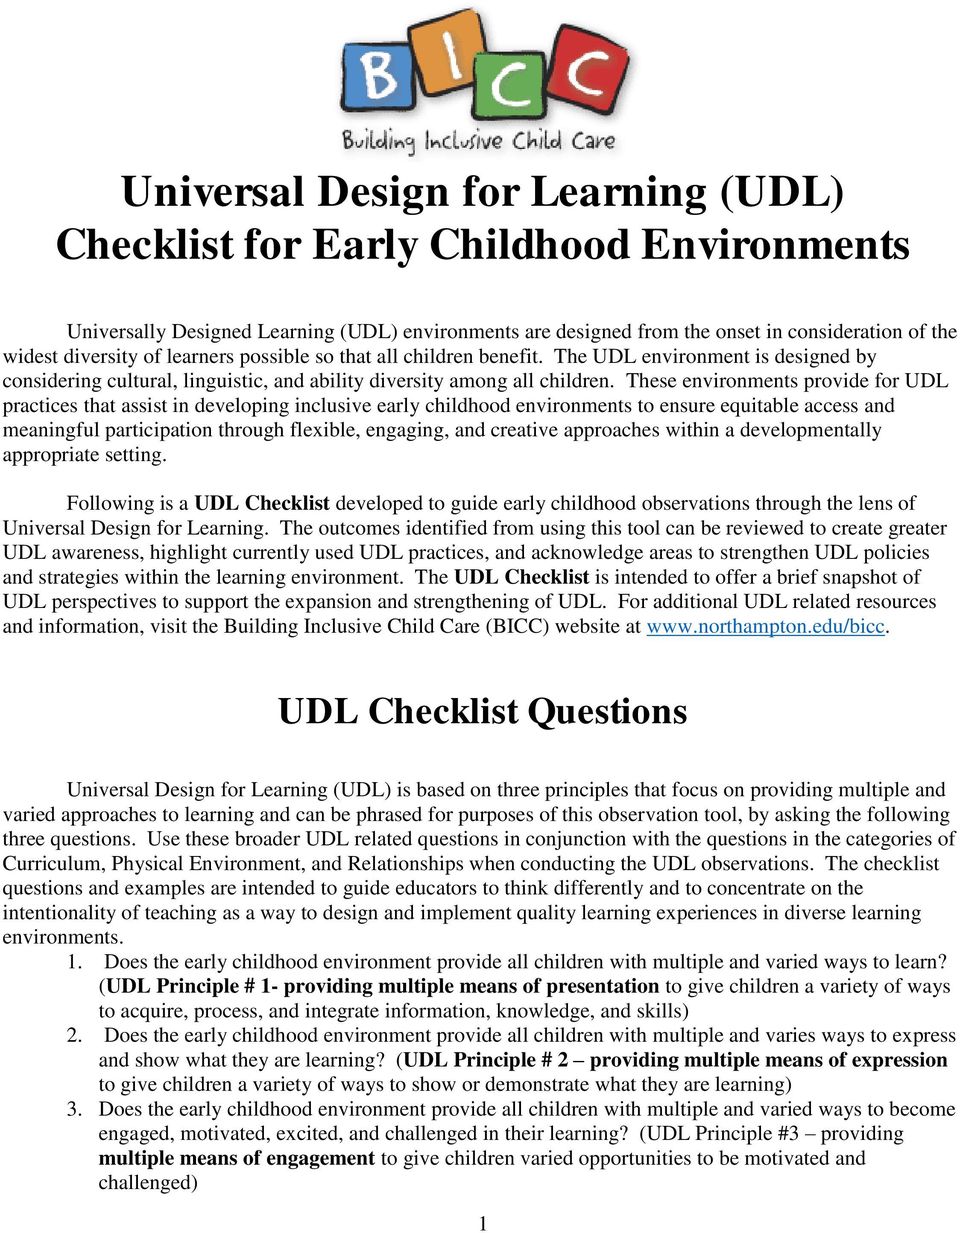 These environments provide for UDL practices that assist in developing inclusive early childhood environments to ensure equitable access and meaningful participation through flexible, engaging, and